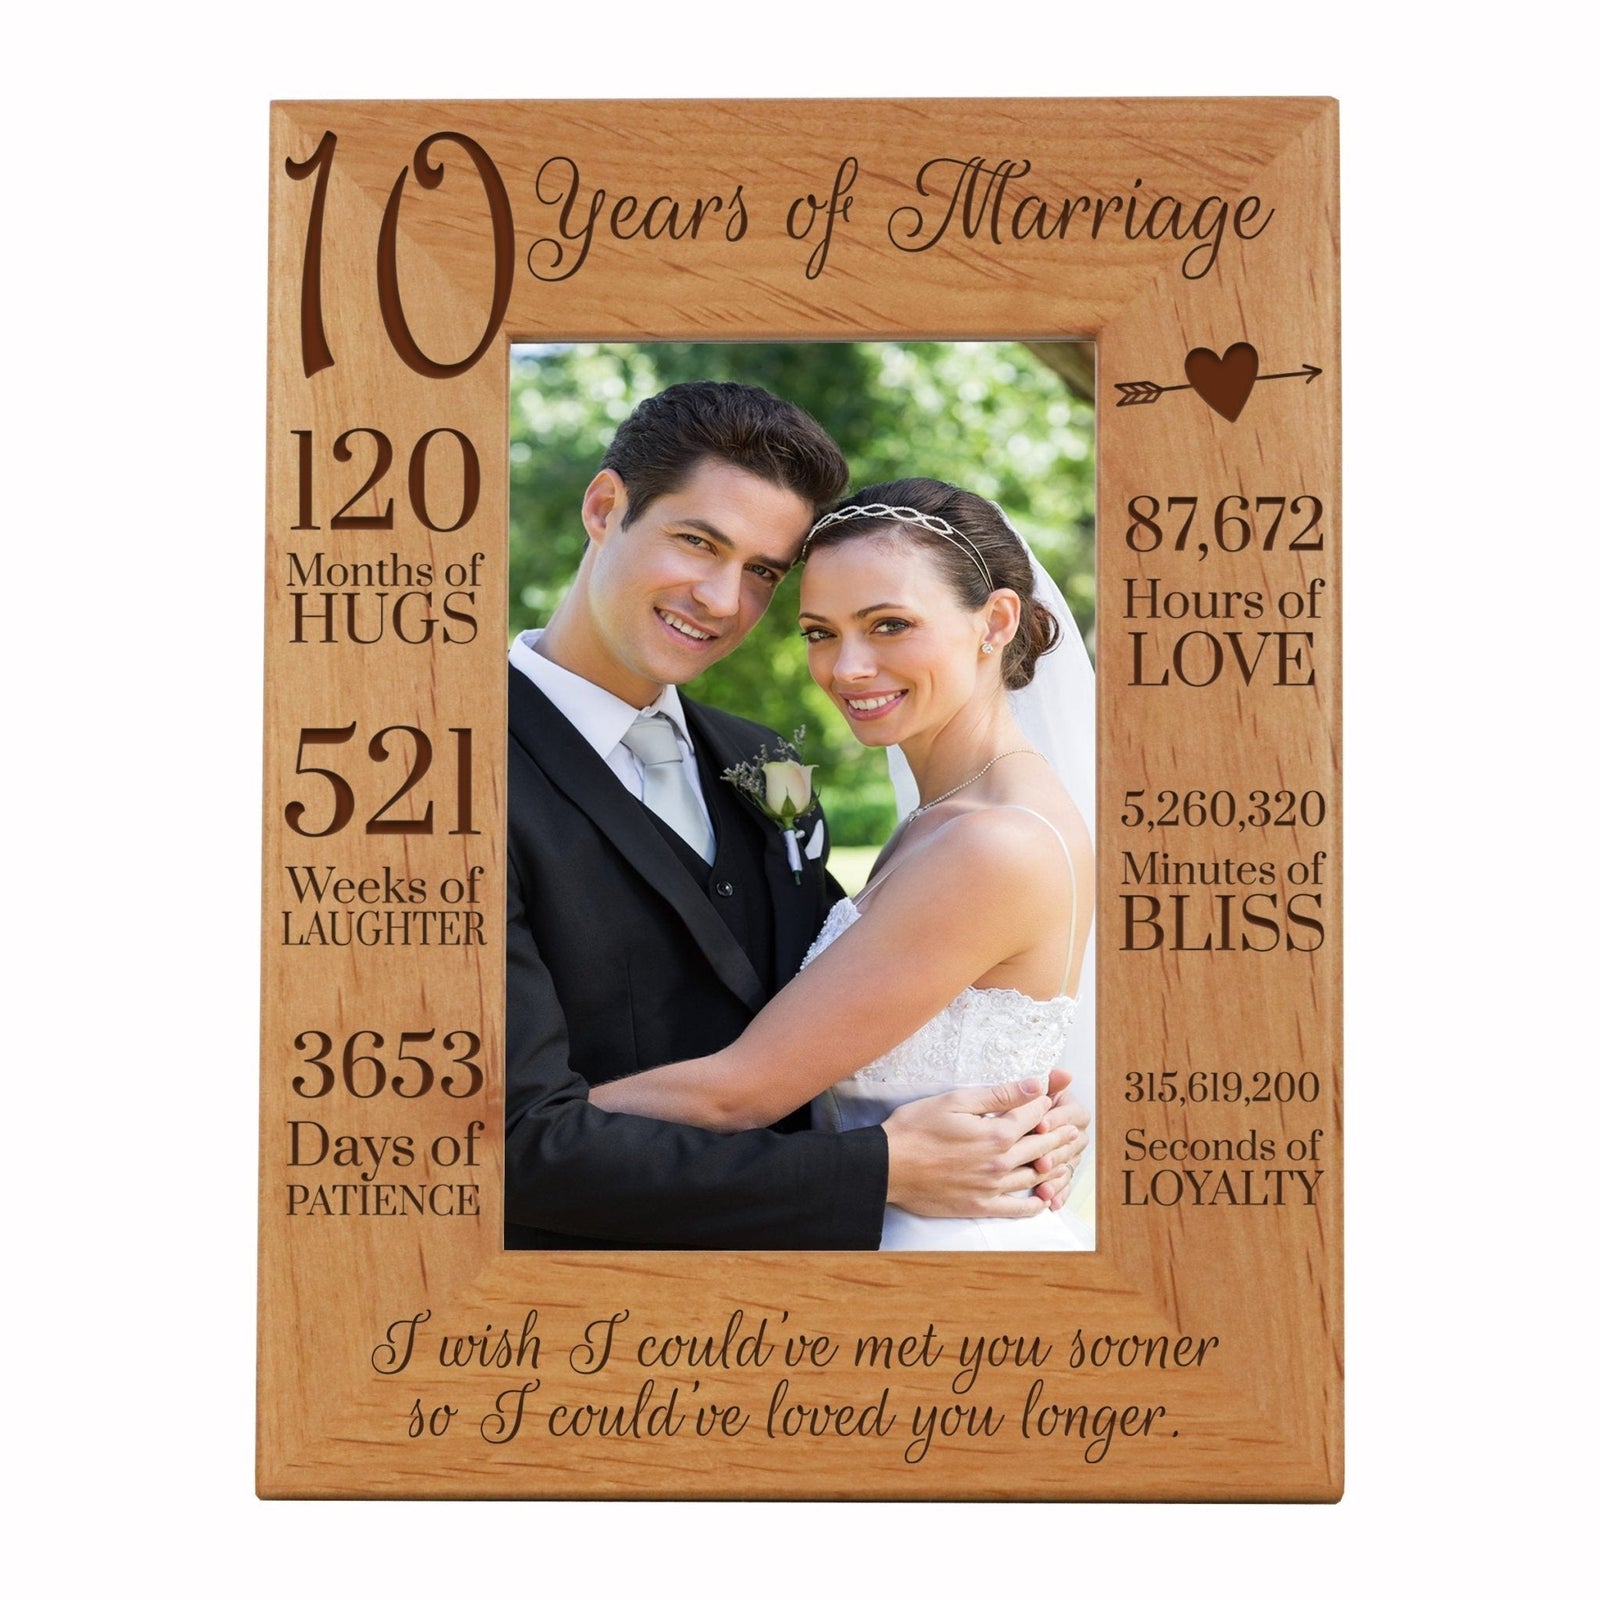 Engraved 10th Anniversary Picture Frame Gift for Couples - Met You Sooner - LifeSong Milestones